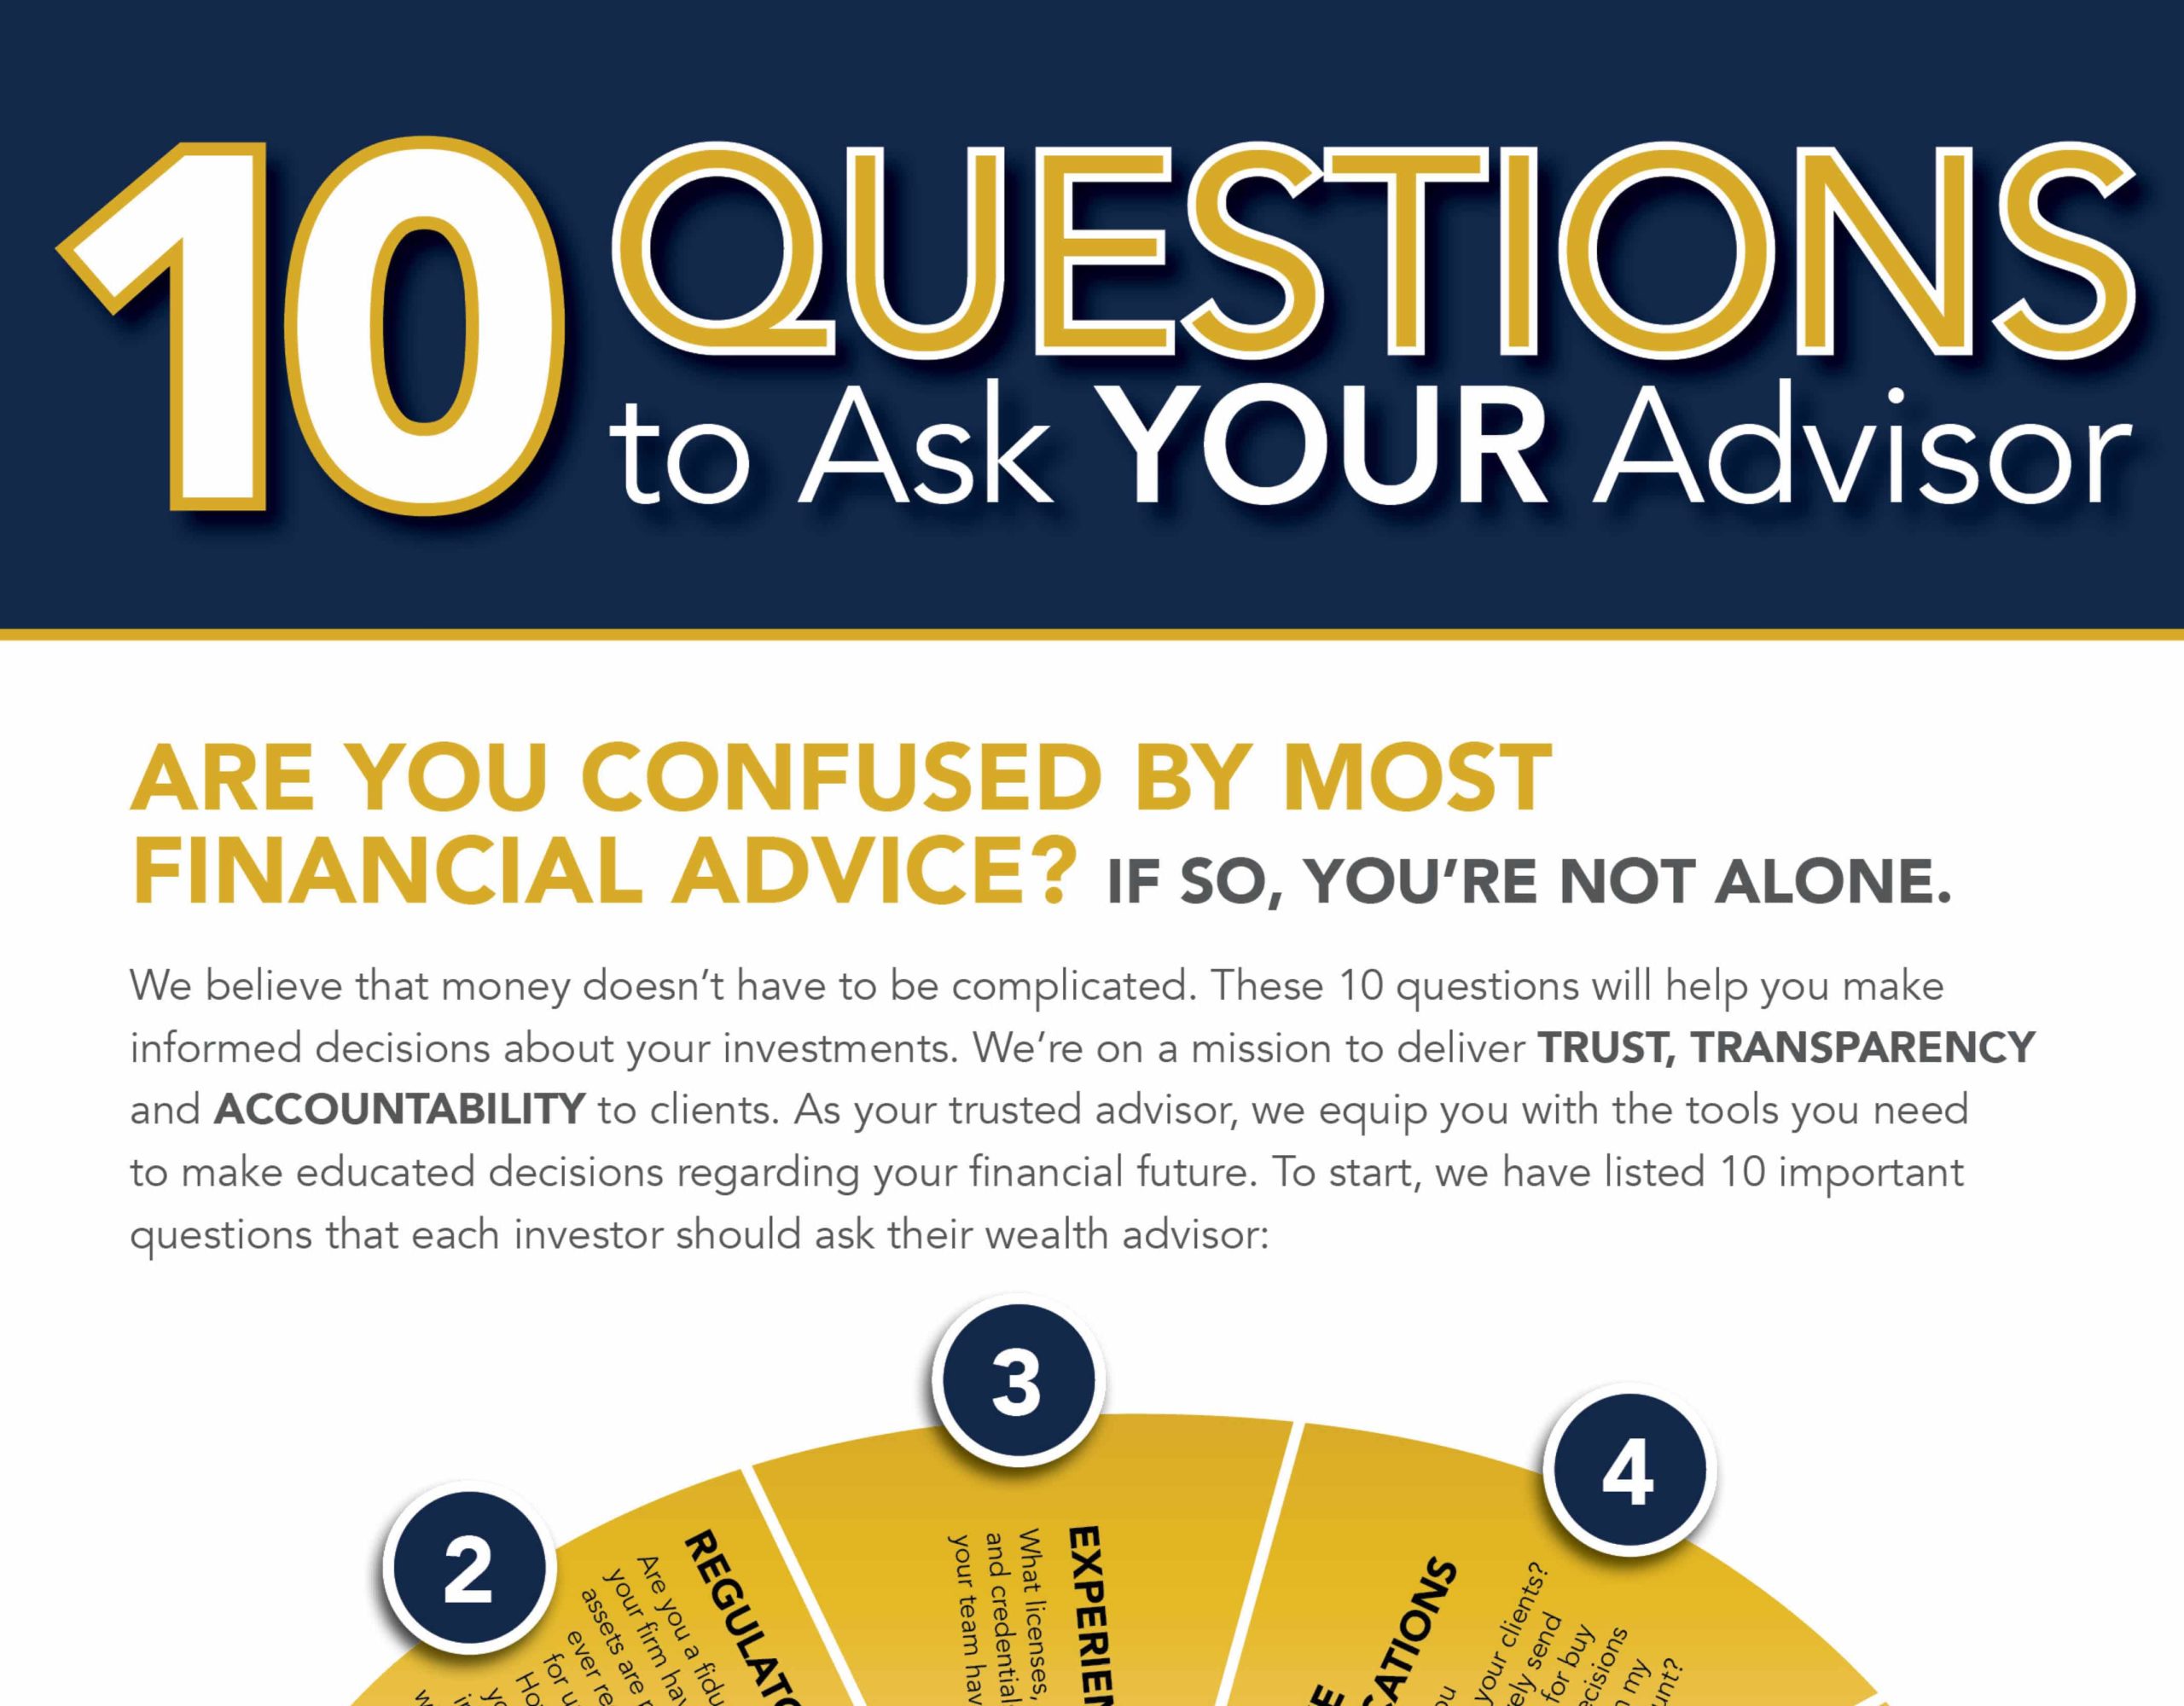 10 Questions to Ask Your Advisor Infographic